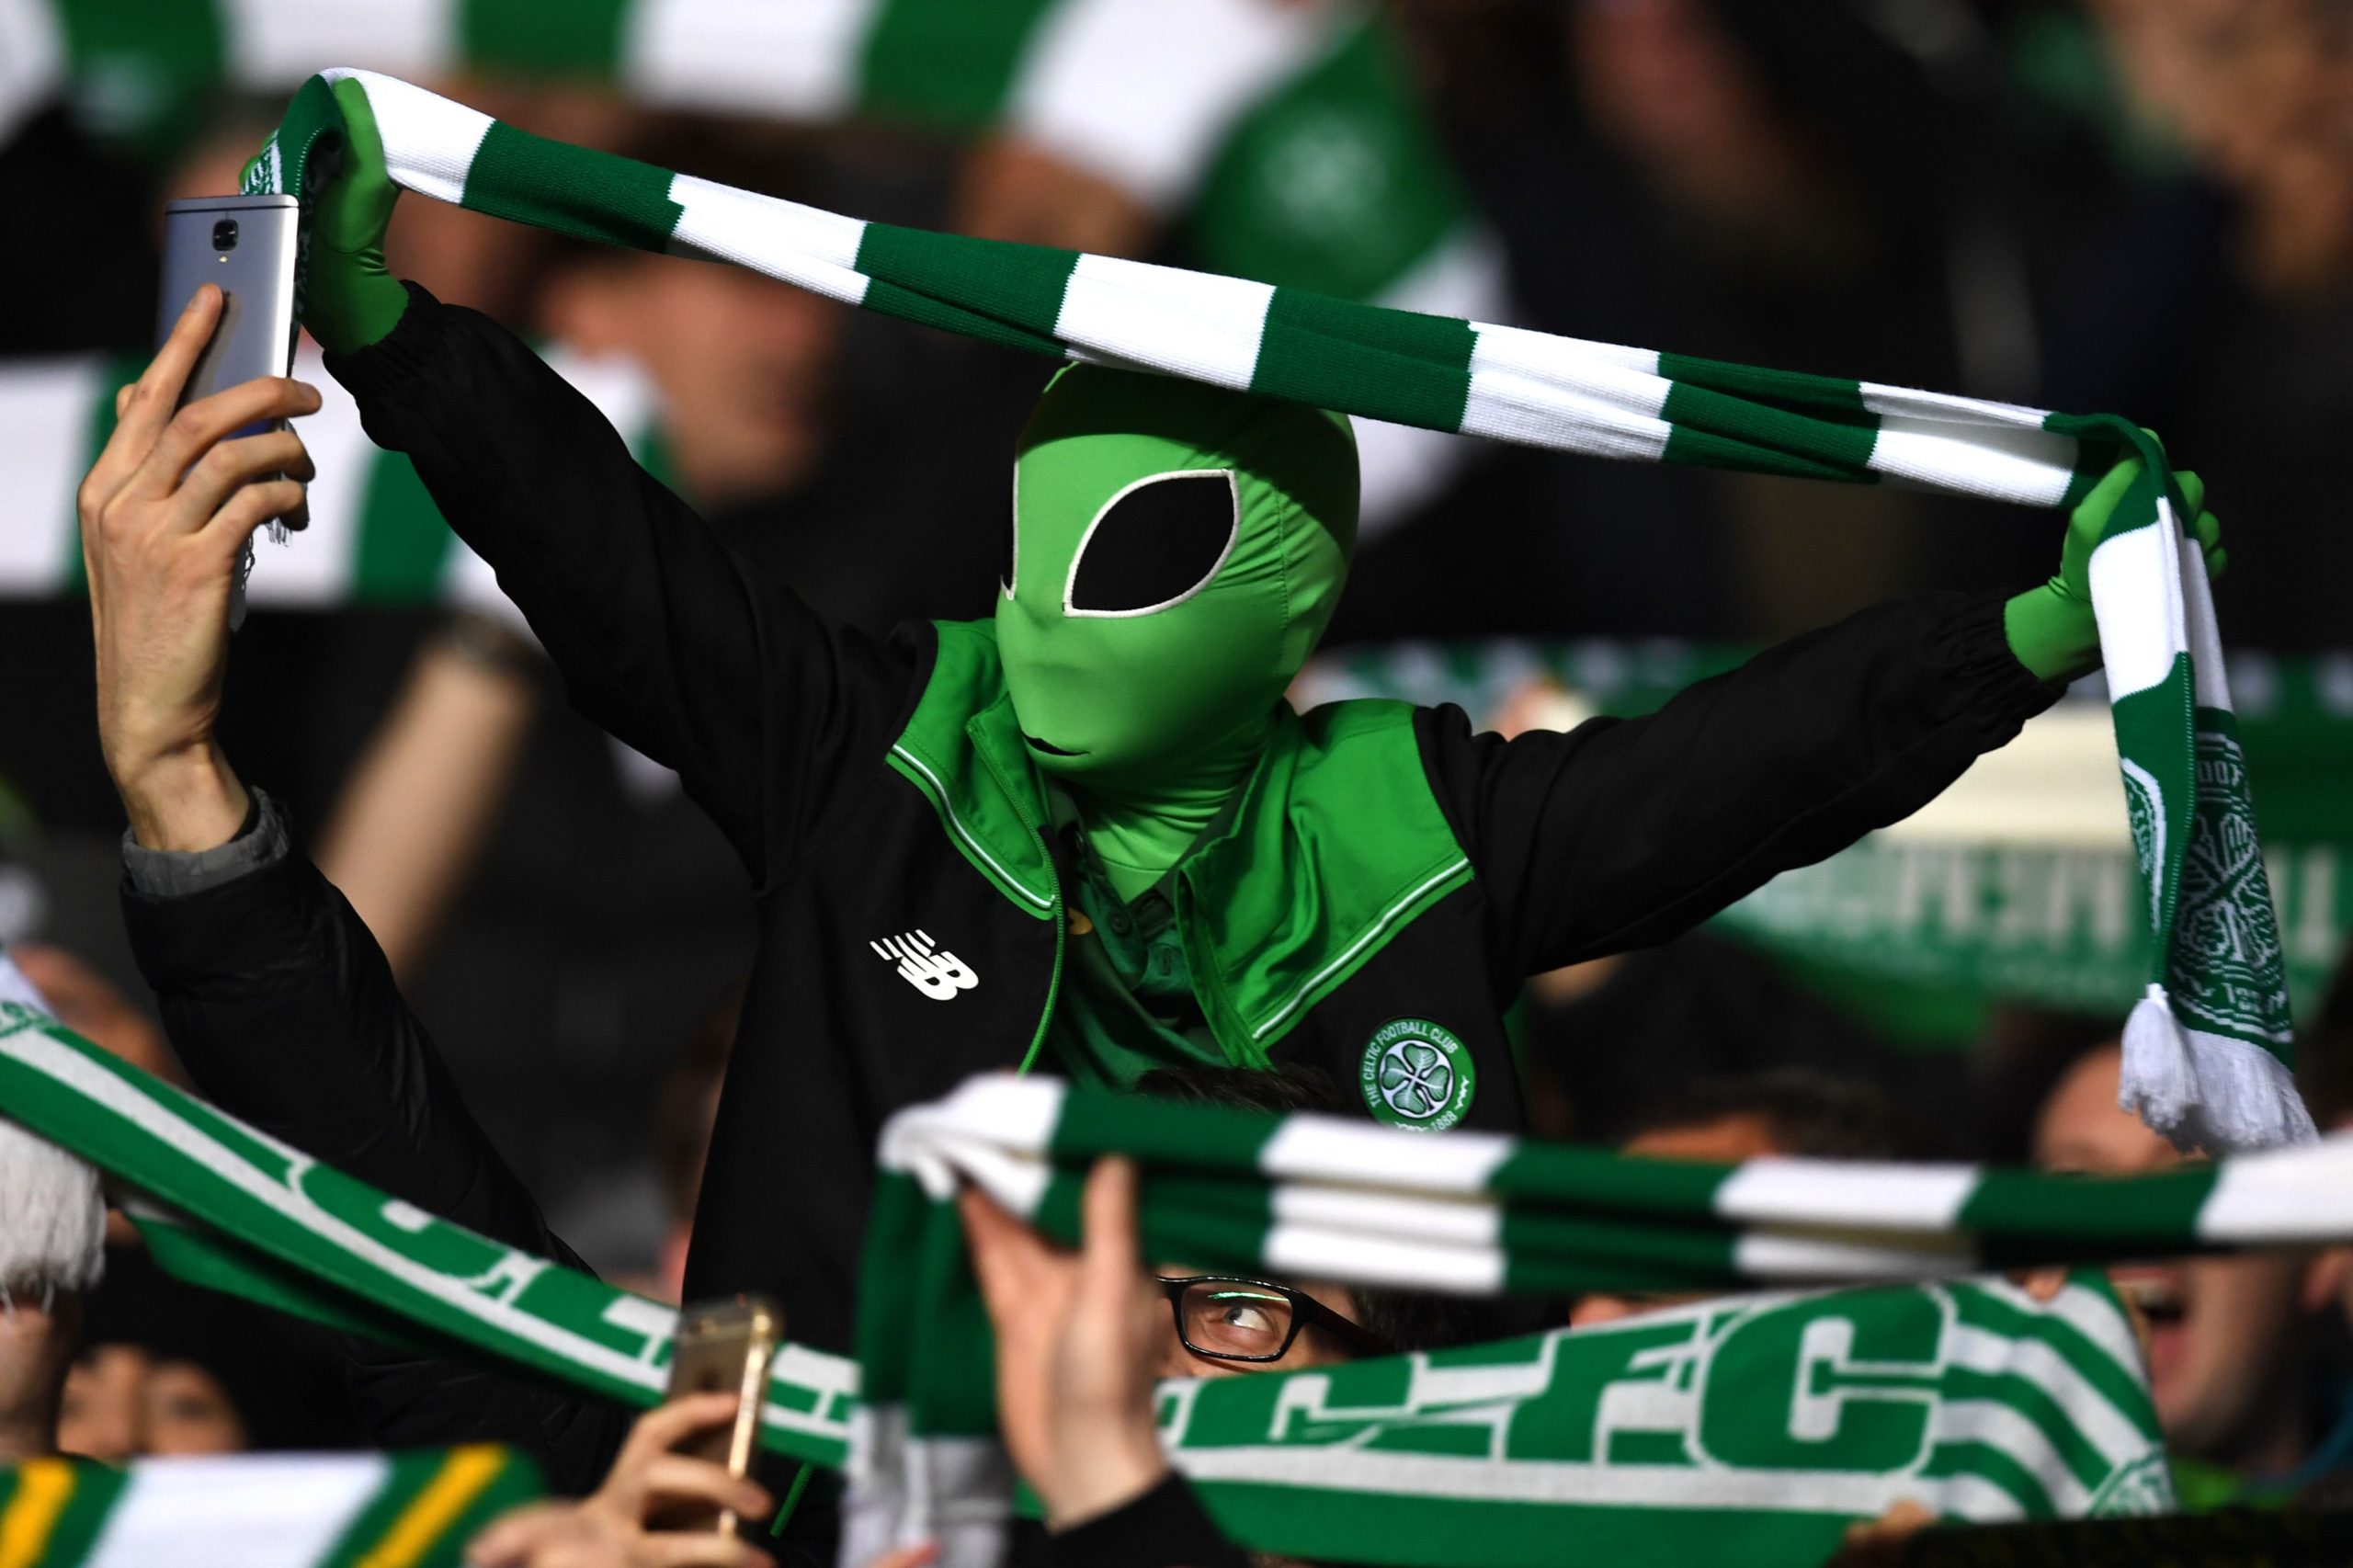 "Remember the 90s" talk is exclusionary and irrelevant; Celtic's problems are very modern